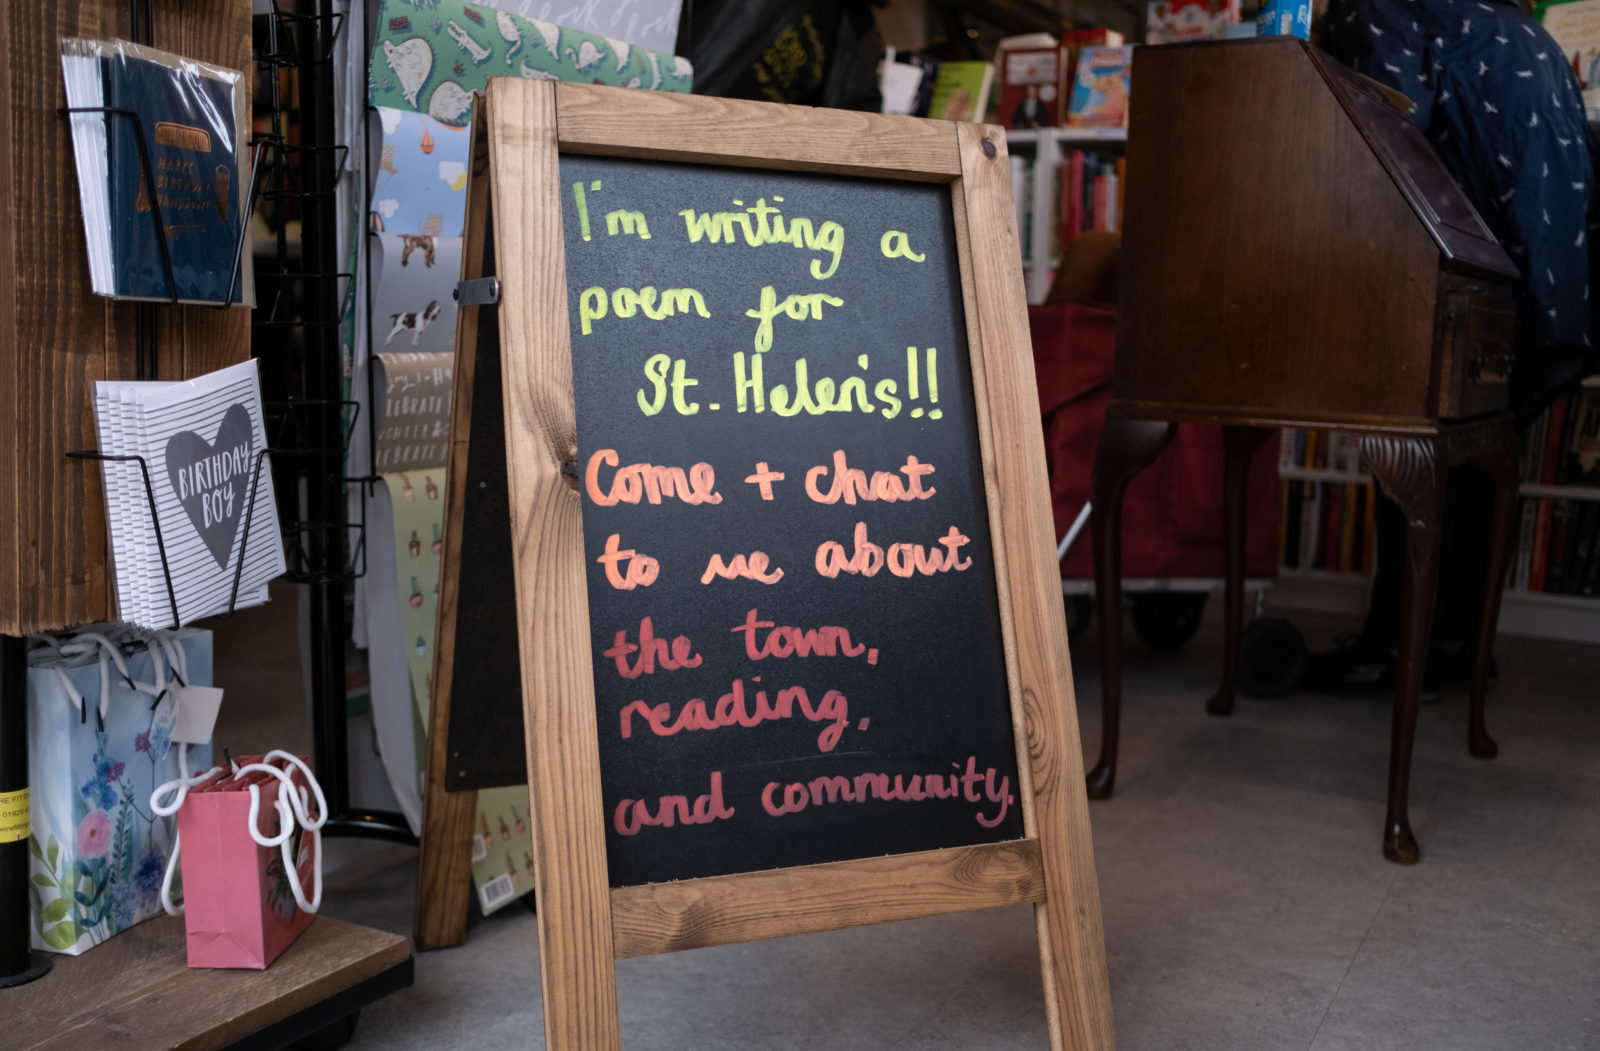 A board sign with writing on it saying "I'm writing a poem for St Helens!! Come + chat to me about the town, reading and community."